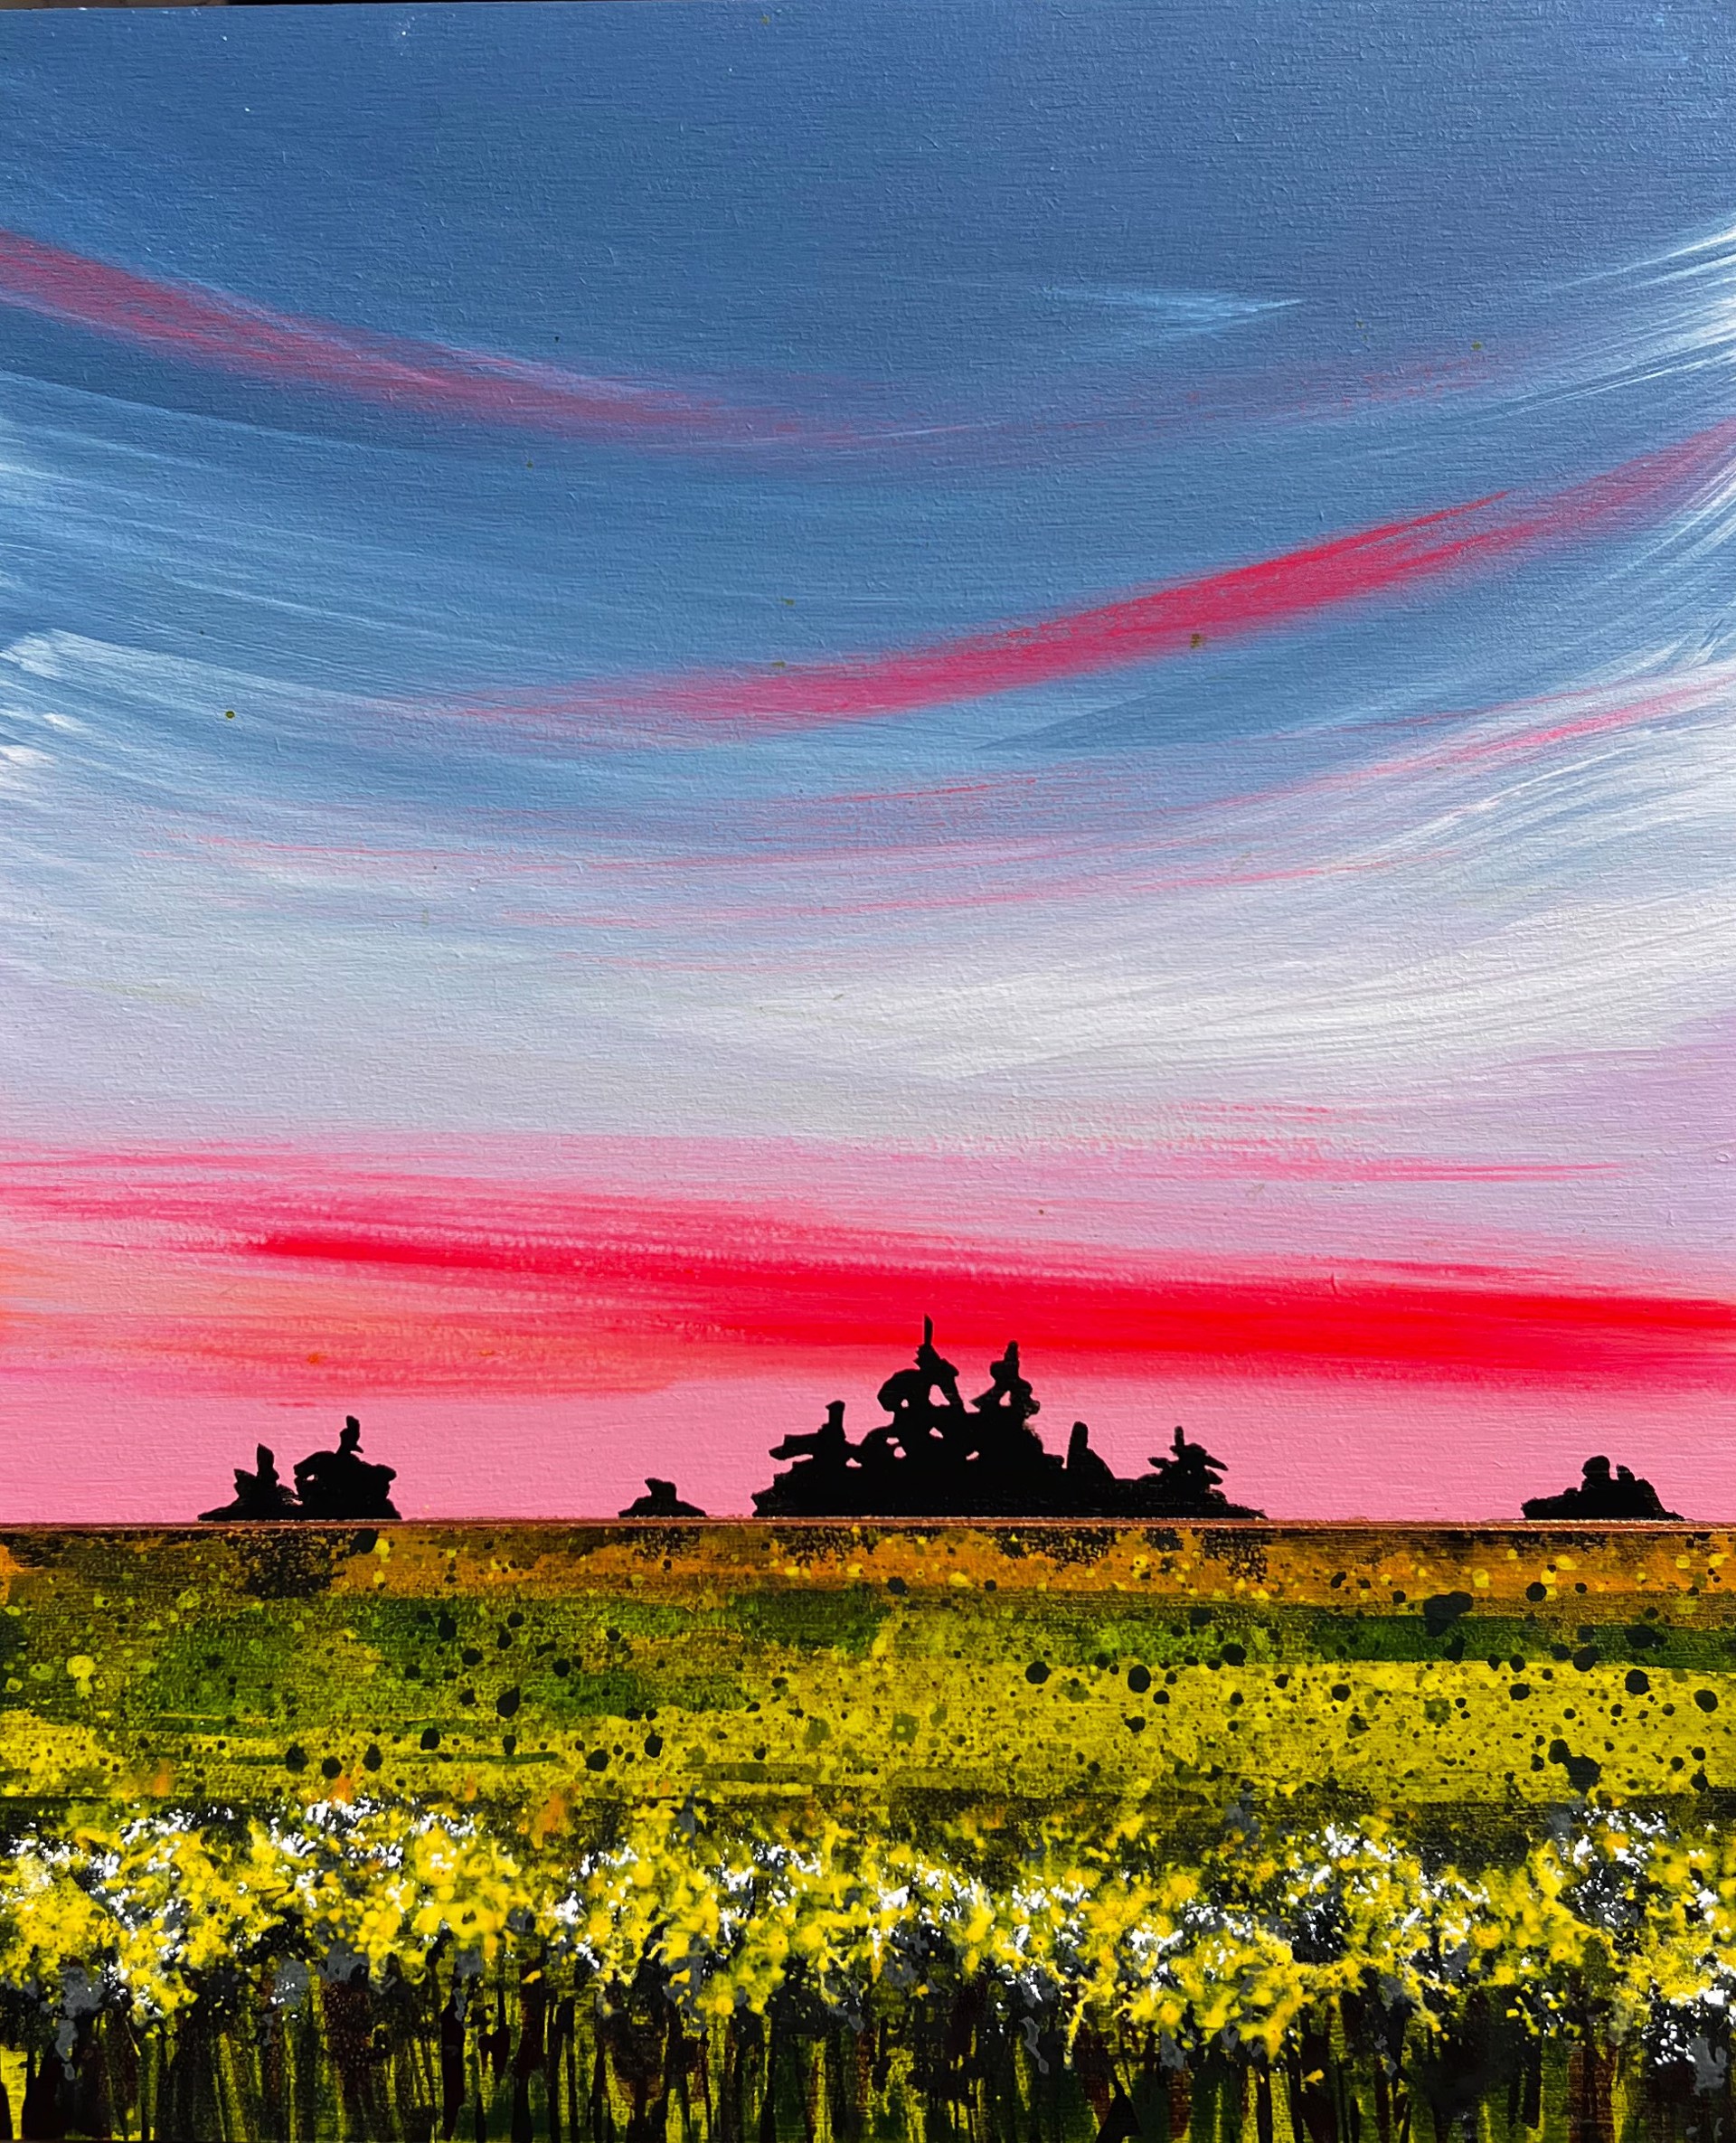 Canola Fields Forever by Kerry Langlois